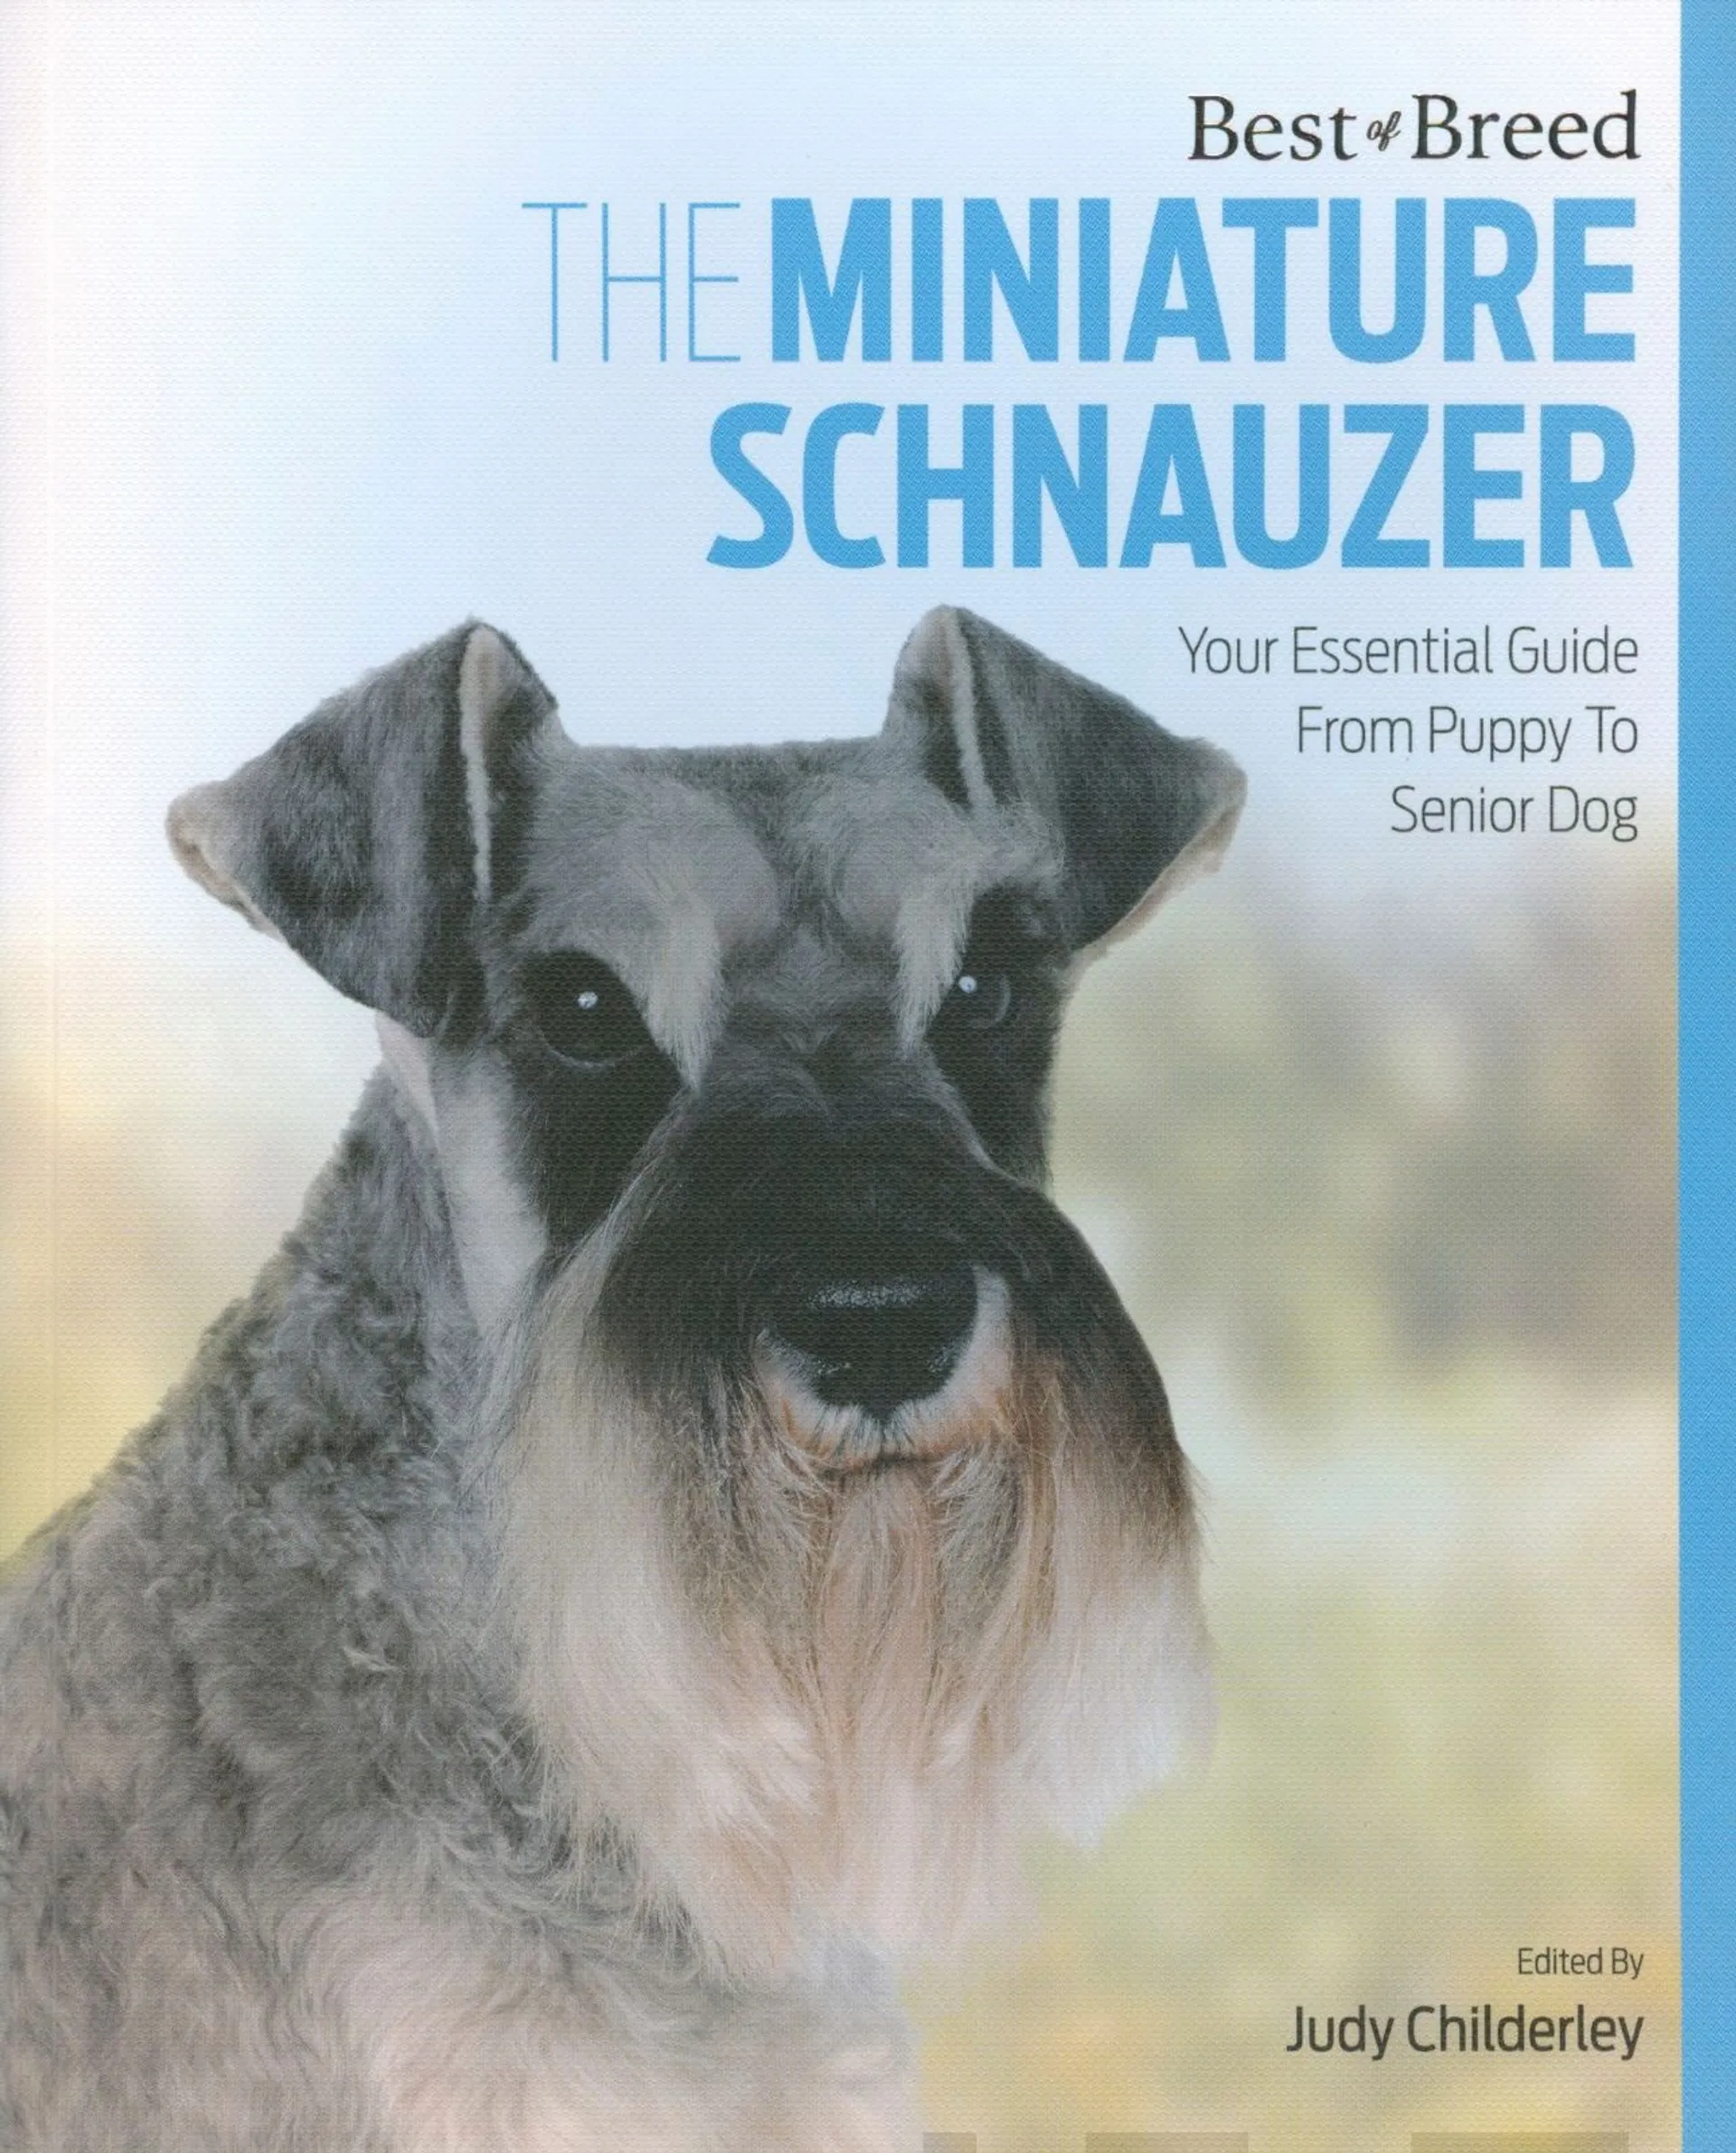 The Miniature Schnauzer - Your Essential Guide From Puppy to Senior Dog